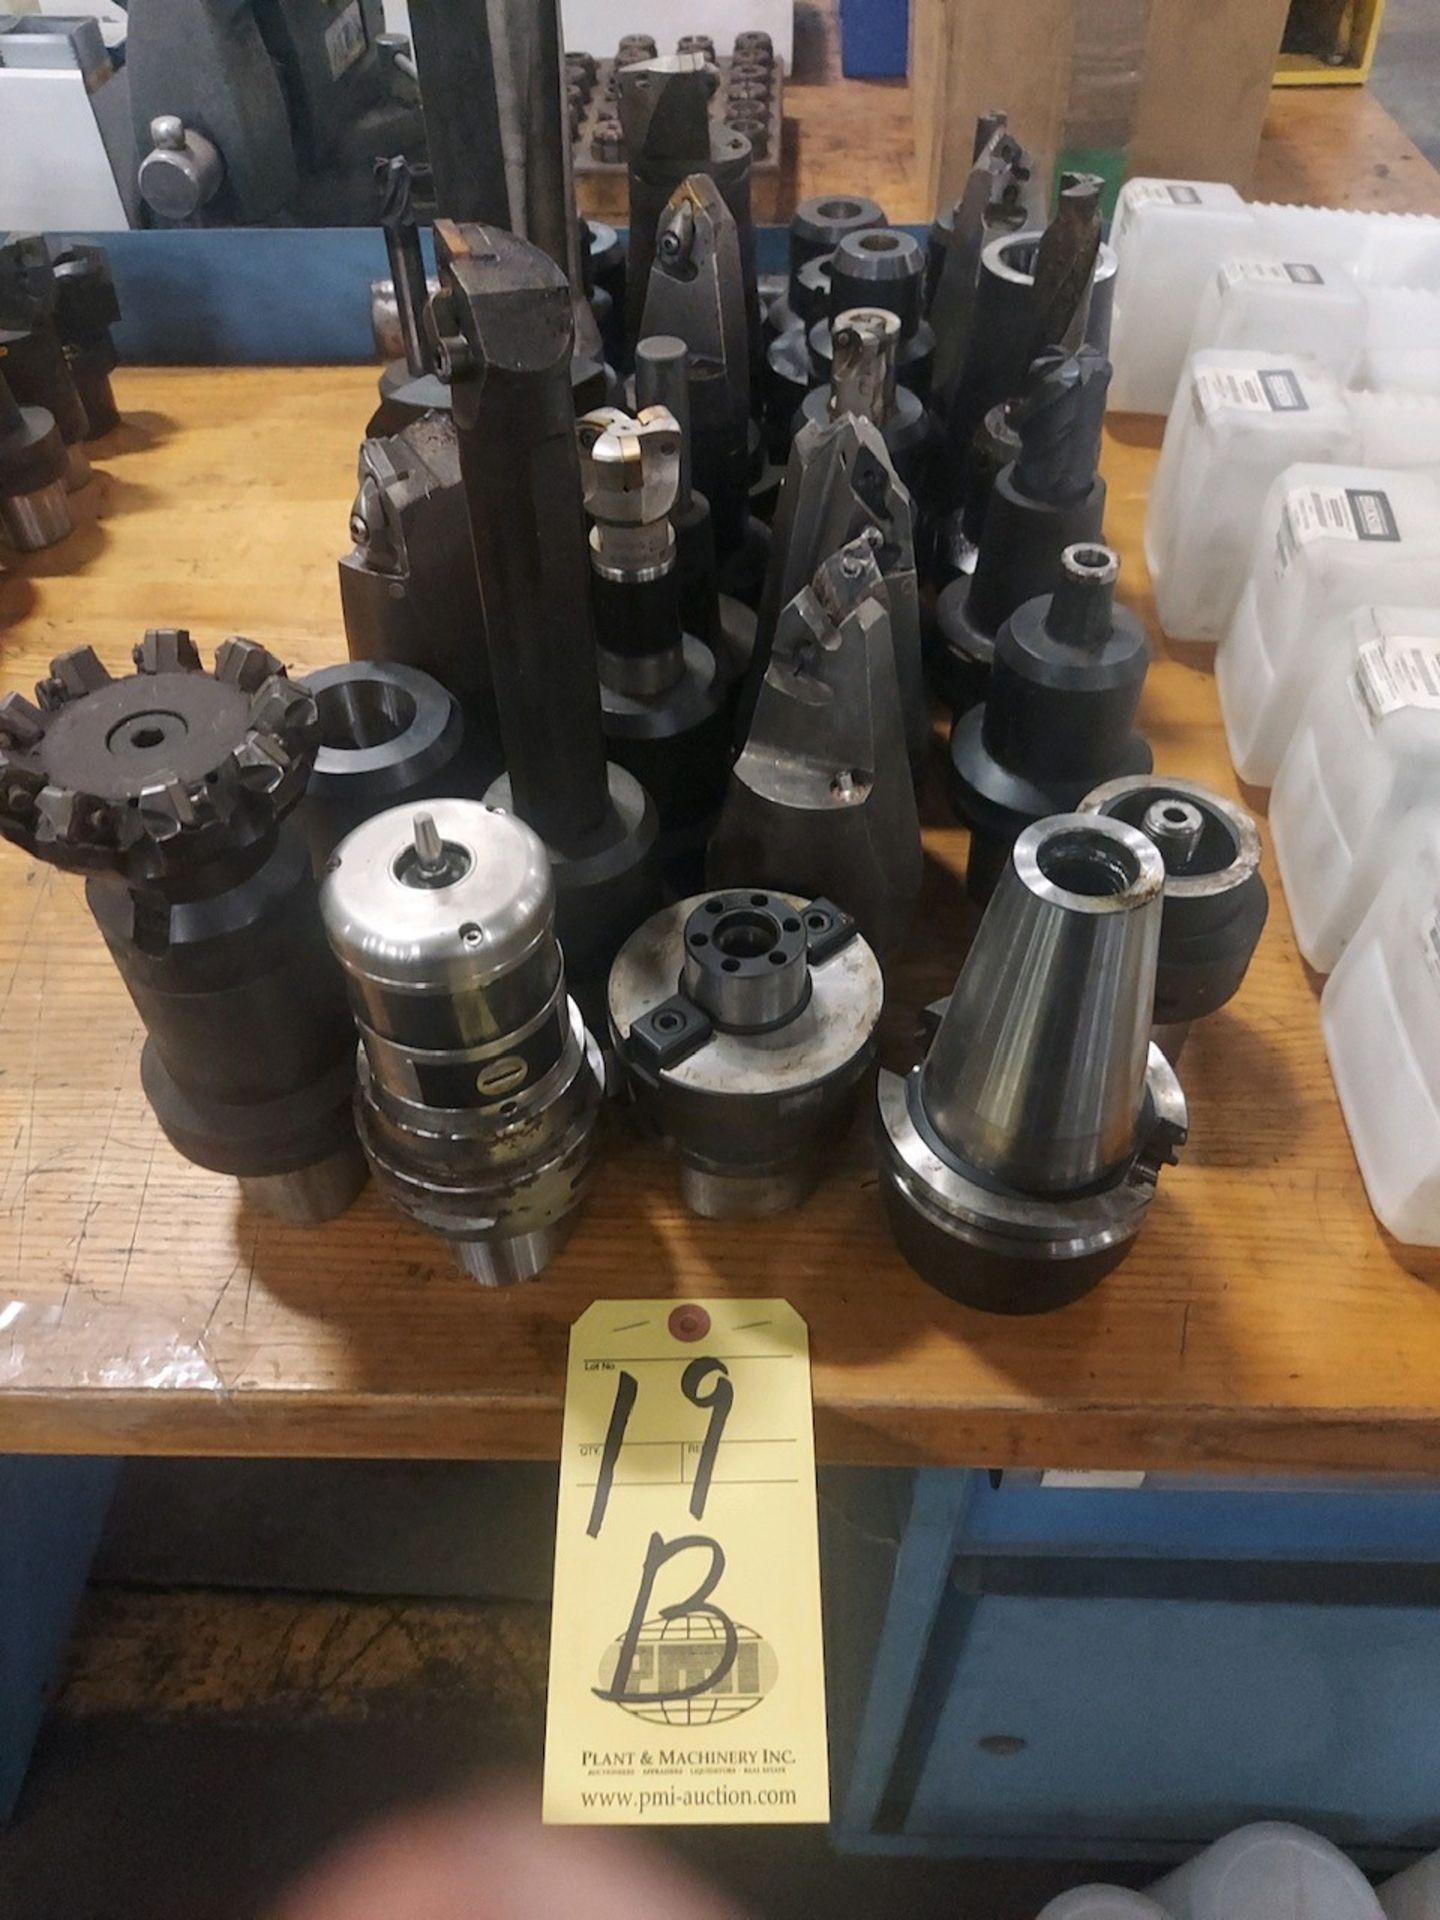 LOT OF CAPTO C8 TOOLING, assorted